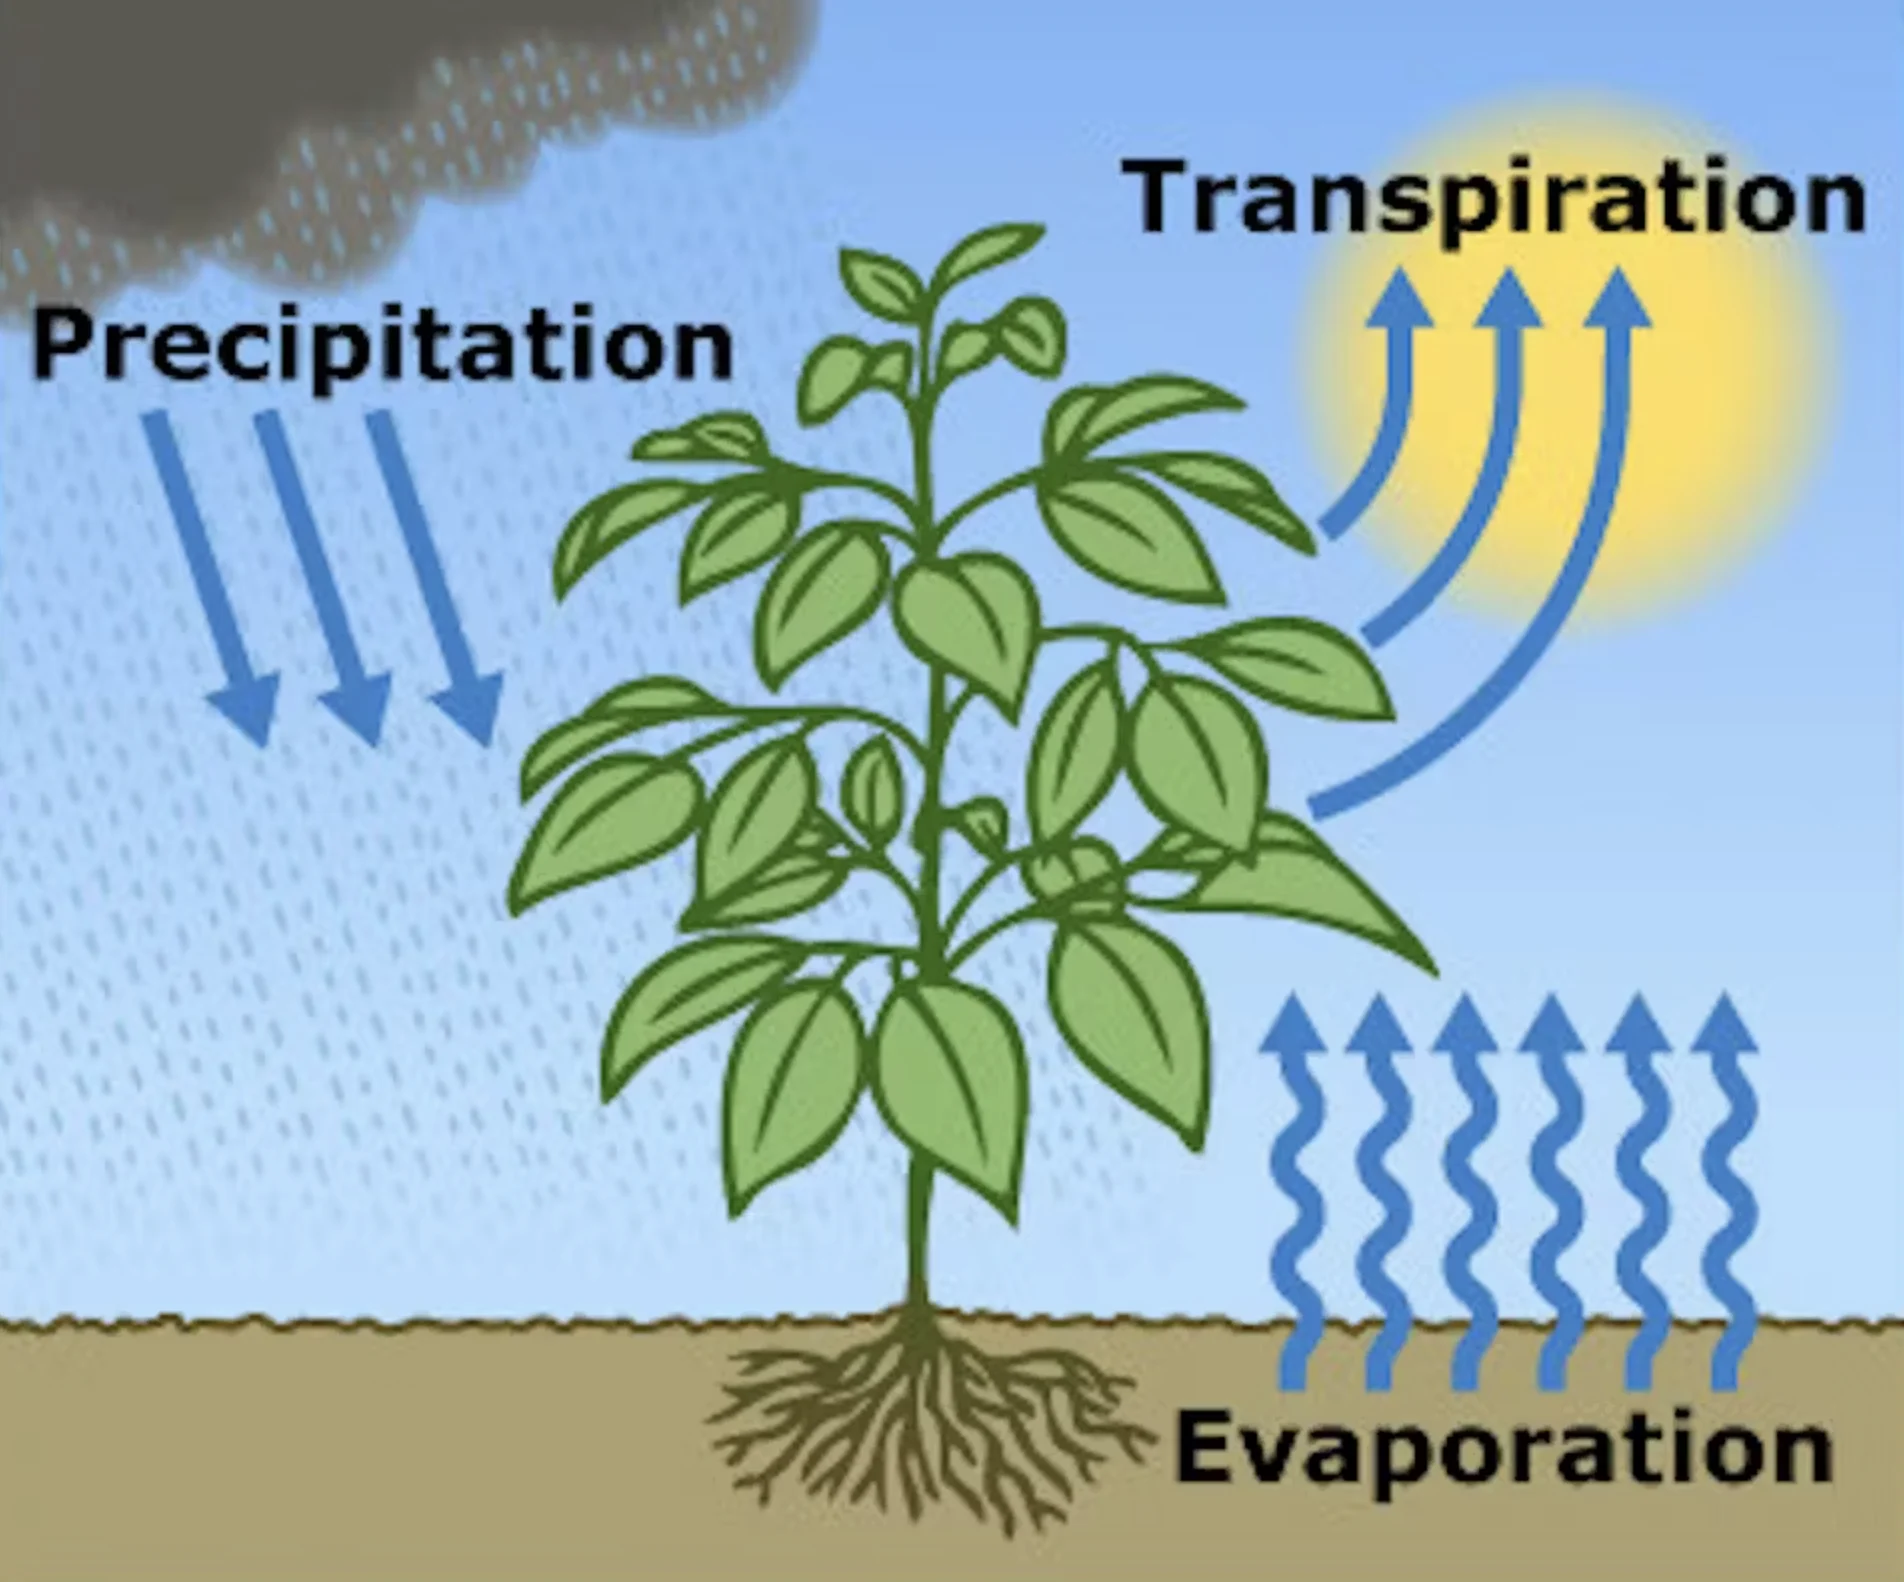 USGS: Water constantly circulates between soil and the atmosphere – sometimes directly, sometimes via plants. USGS